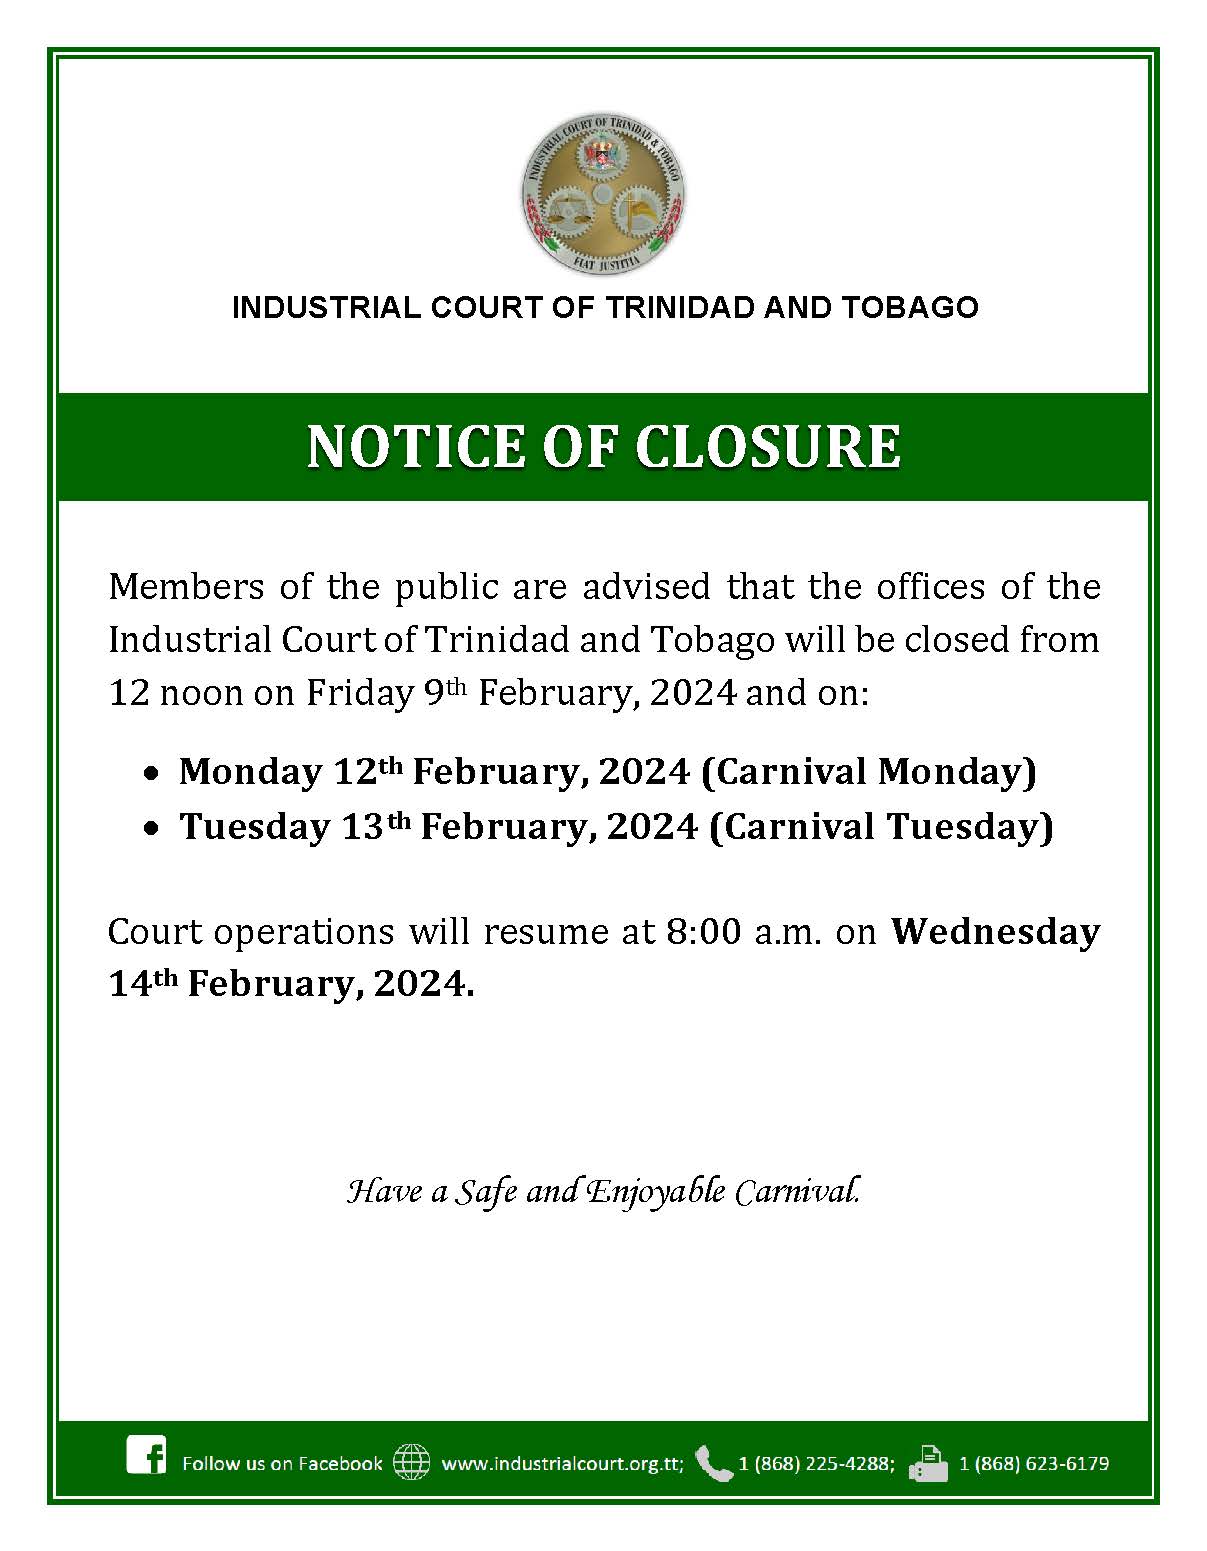 NOTICE OF CLOSURE OF OFFICES Carnival 2024